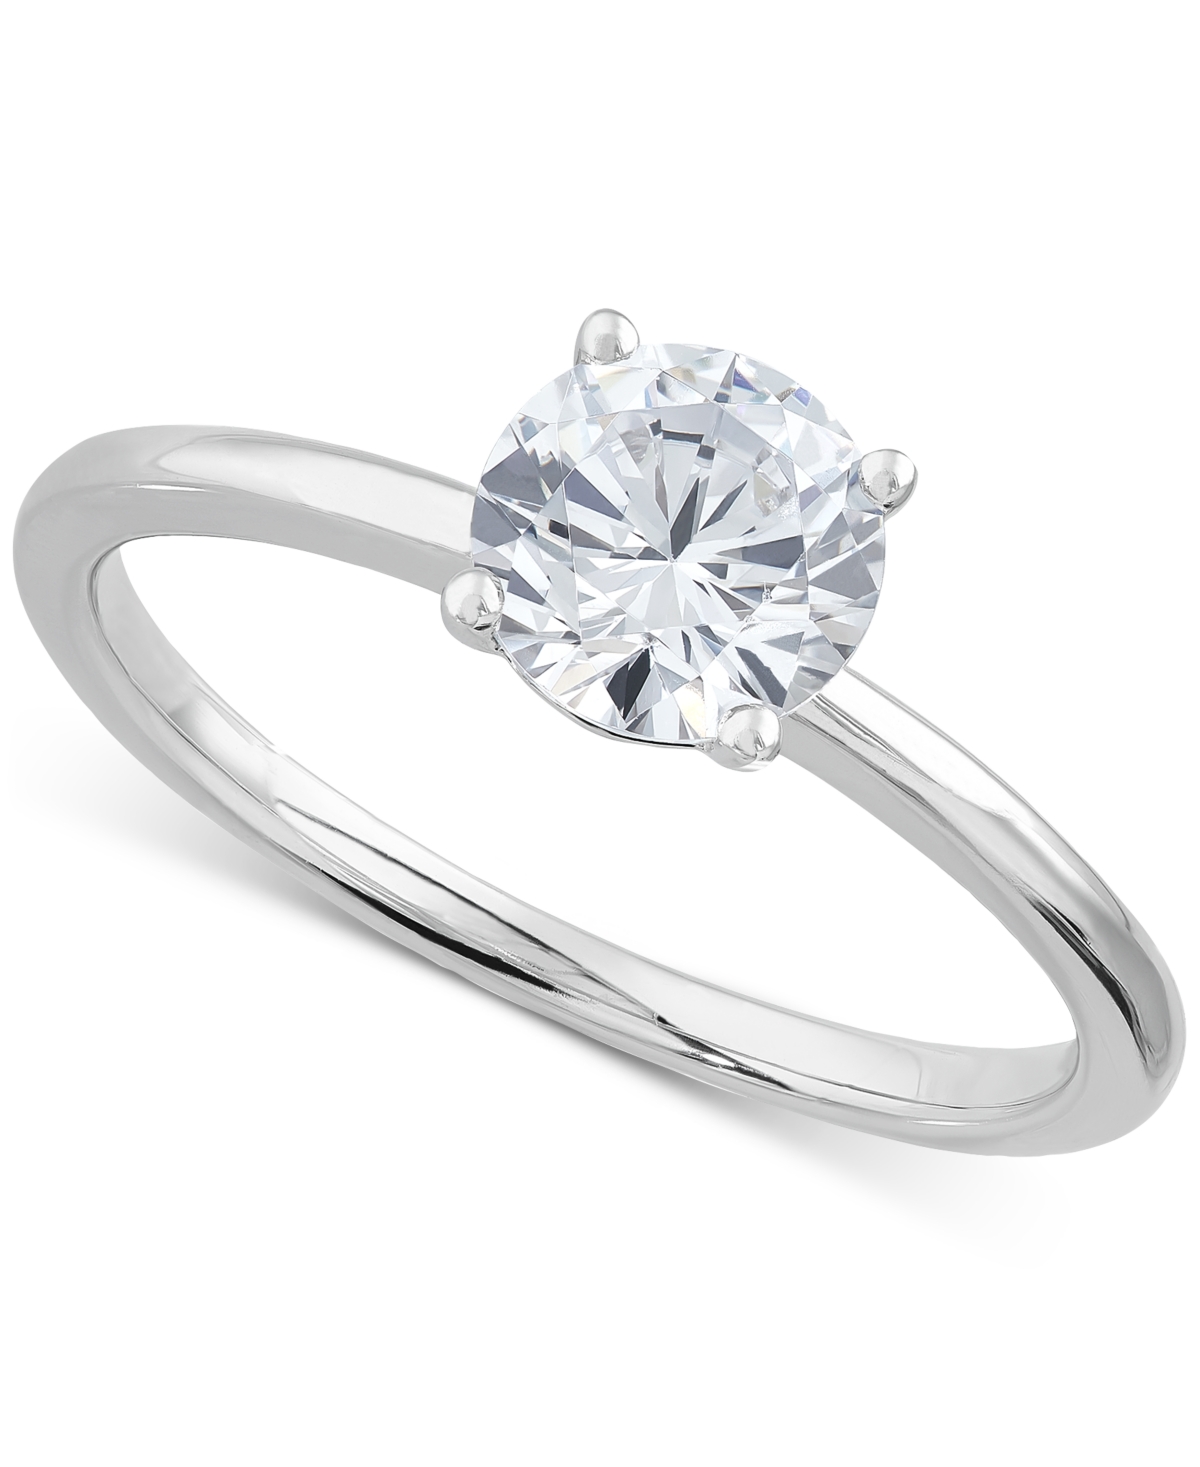 Igi Certified Lab Grown Diamond Engagement Ring (1 ct. t.w.) in 14k White Gold or 14k Gold & White Gold - Two Tone